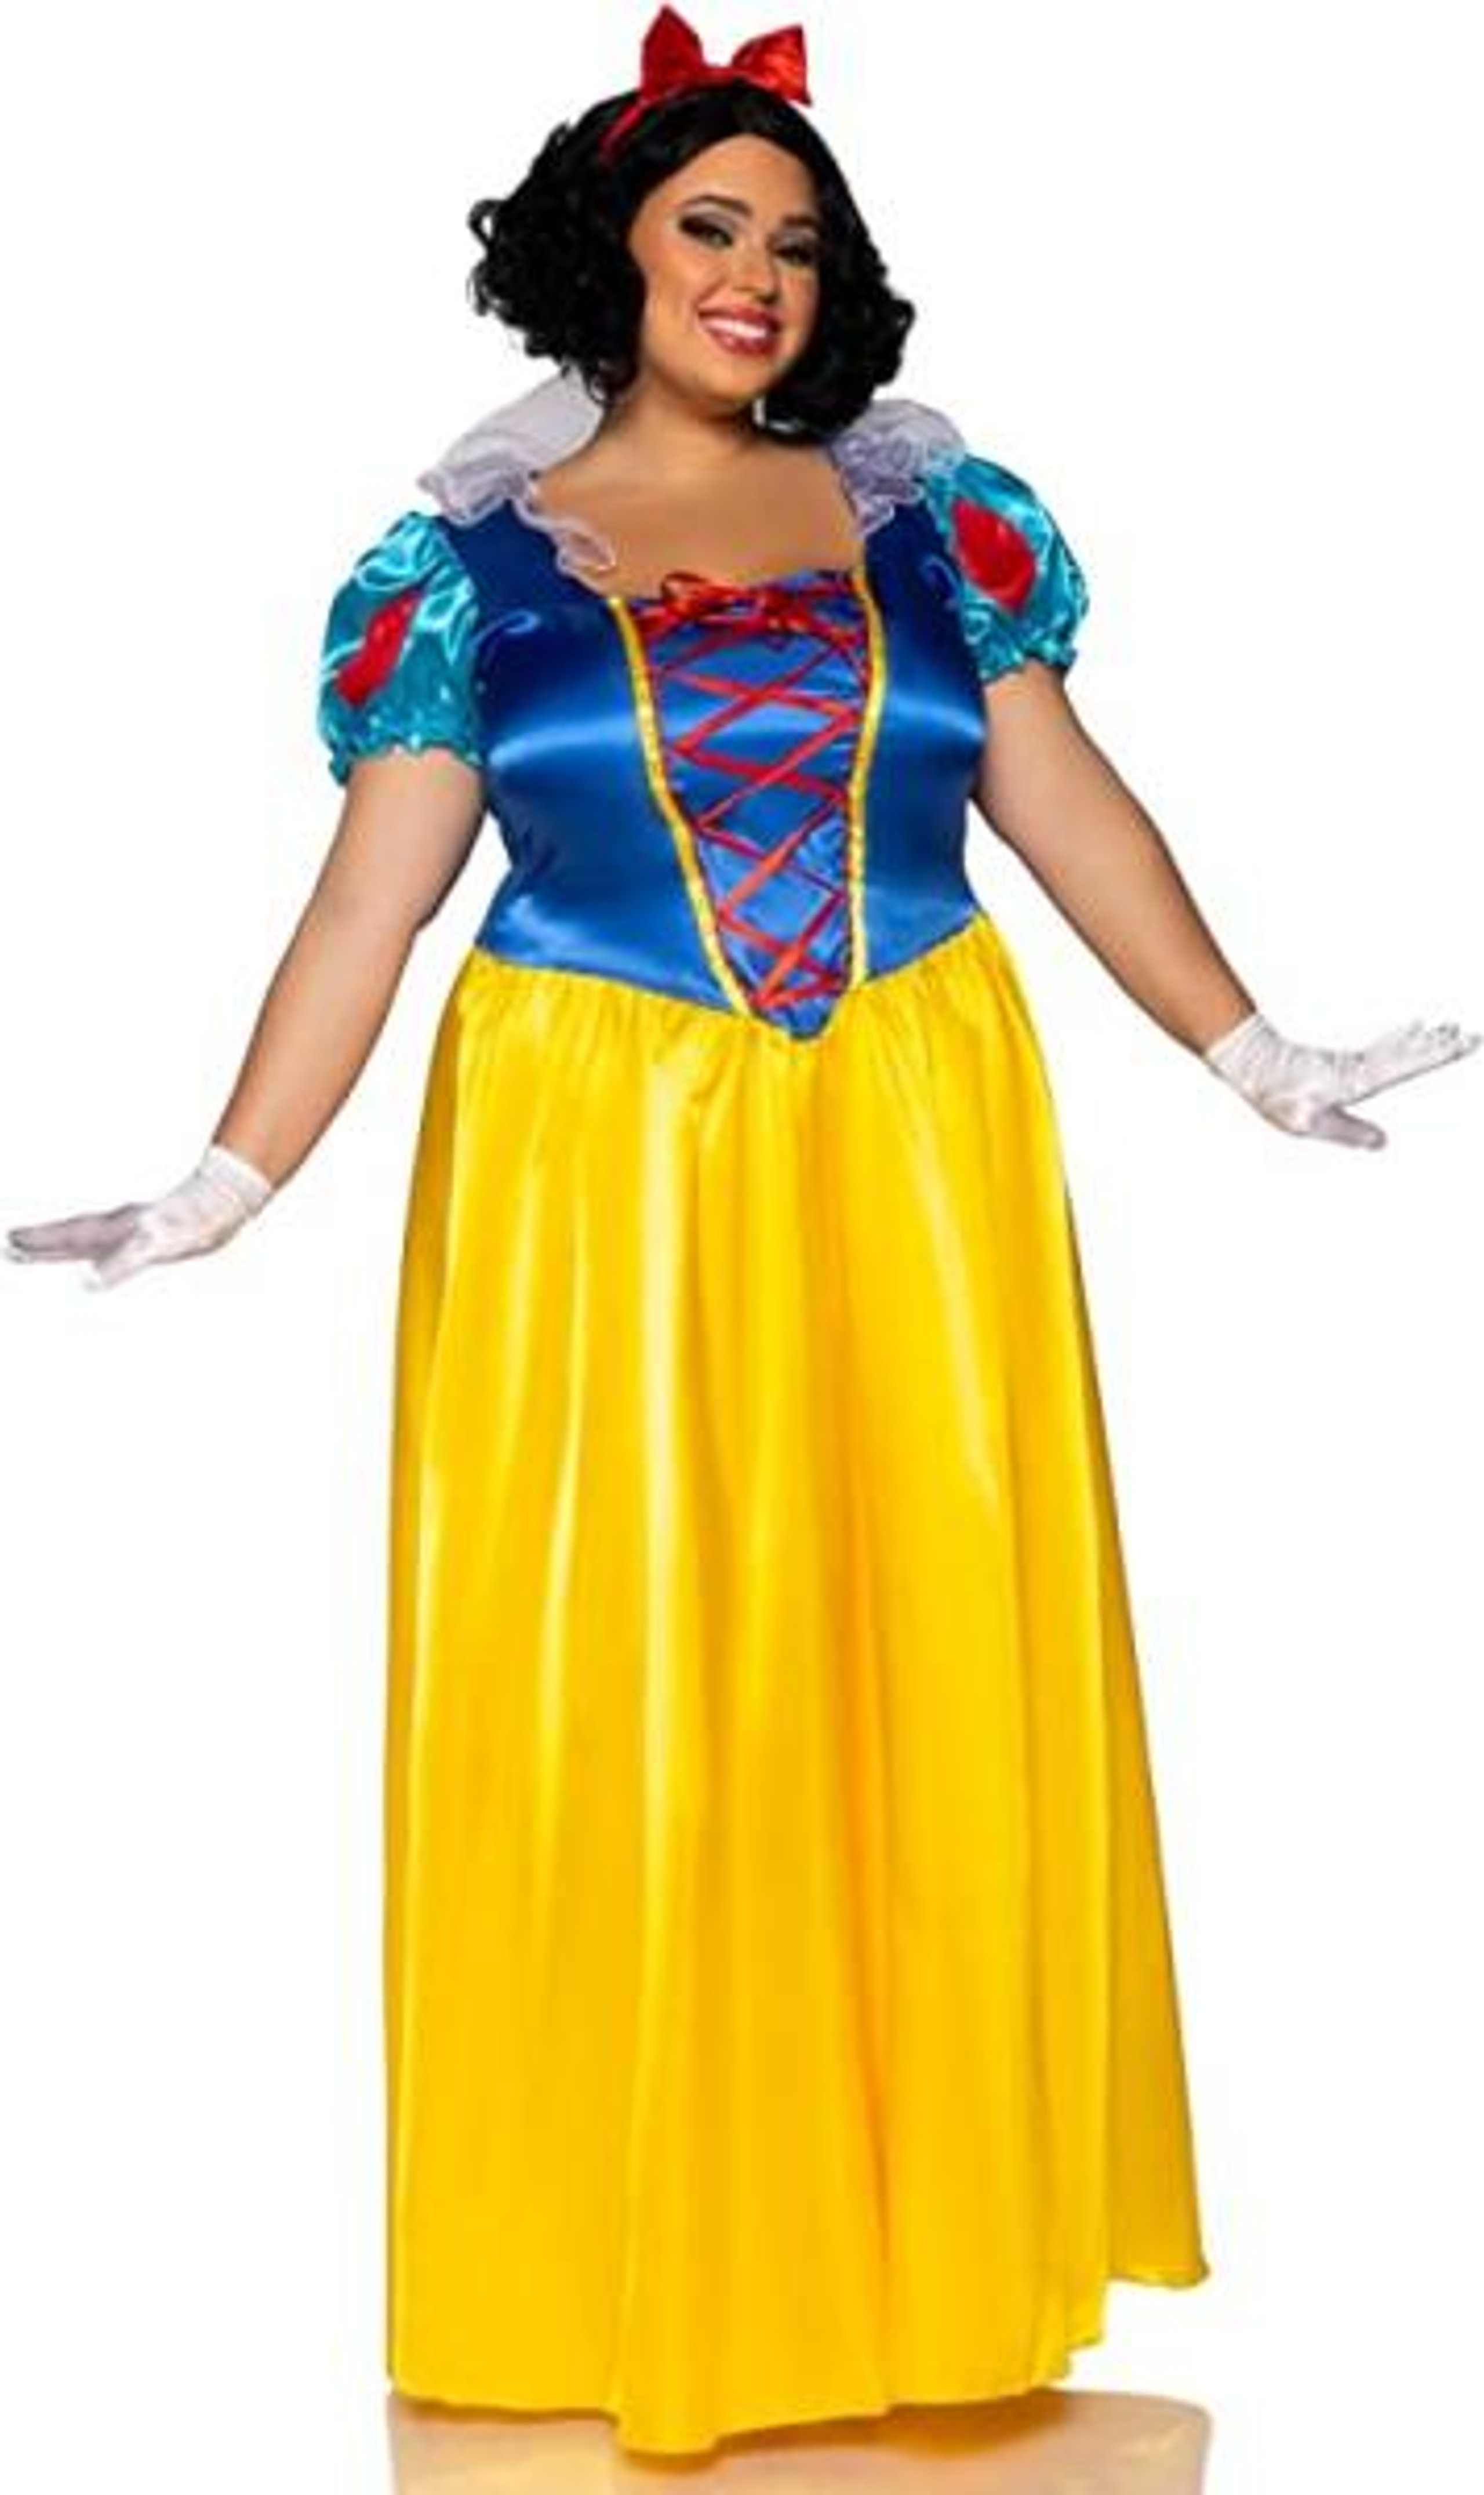 Snow White Costume Plus Snow White And The Seven Dwarves Womens Costumes The Costume Shoppe 2230